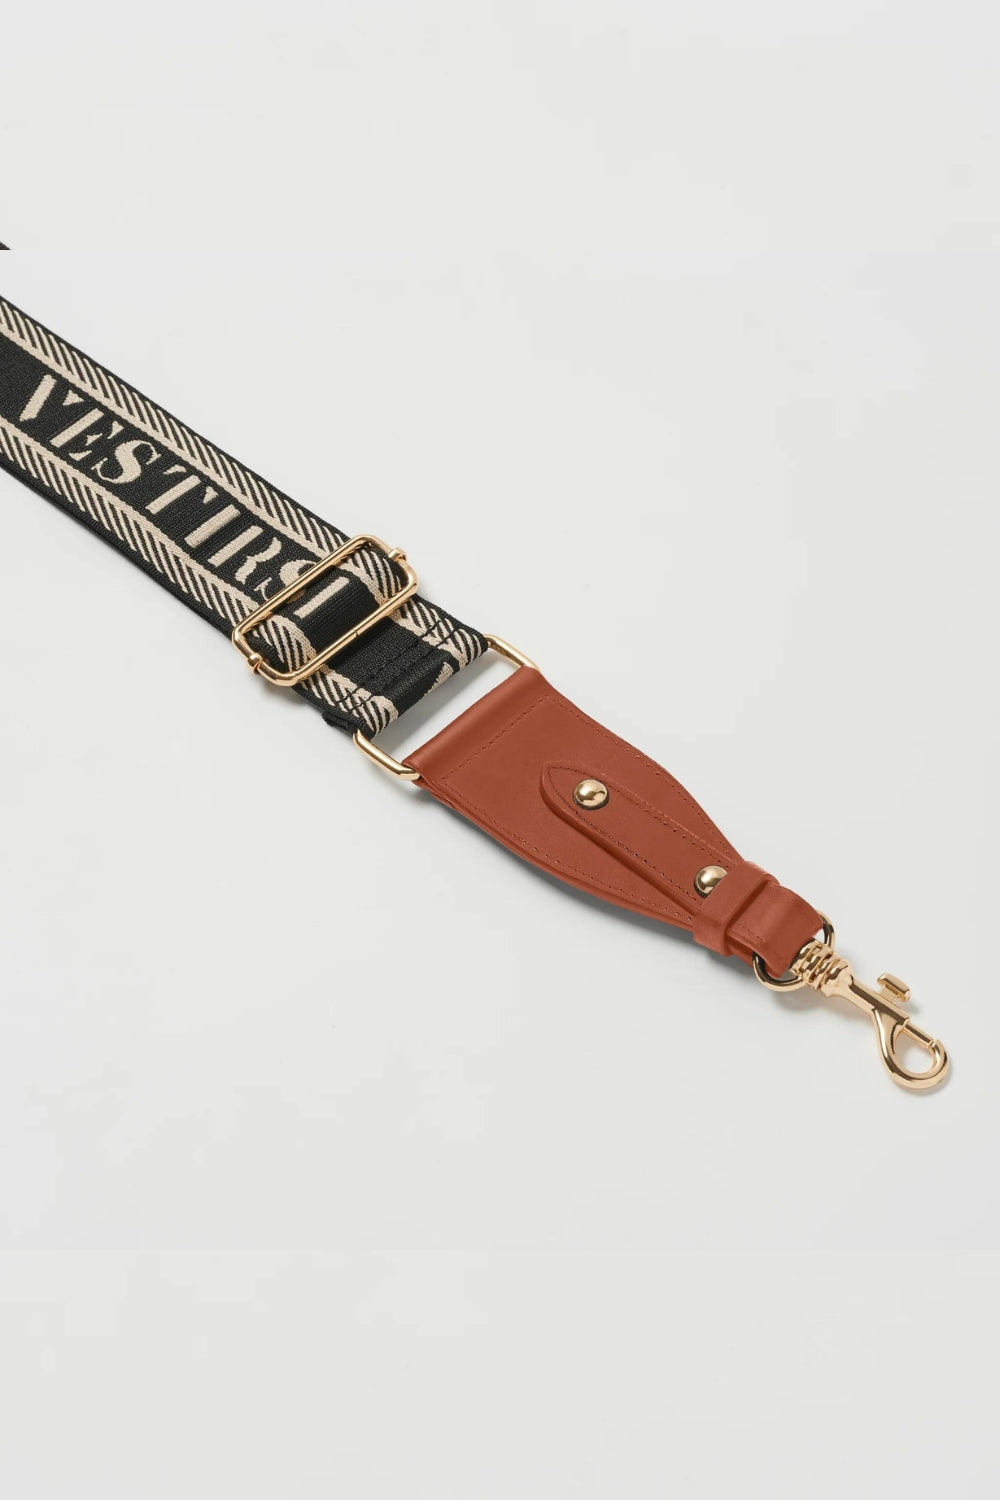 VESTIRSI Woven Strap - Tan Smooth Leather